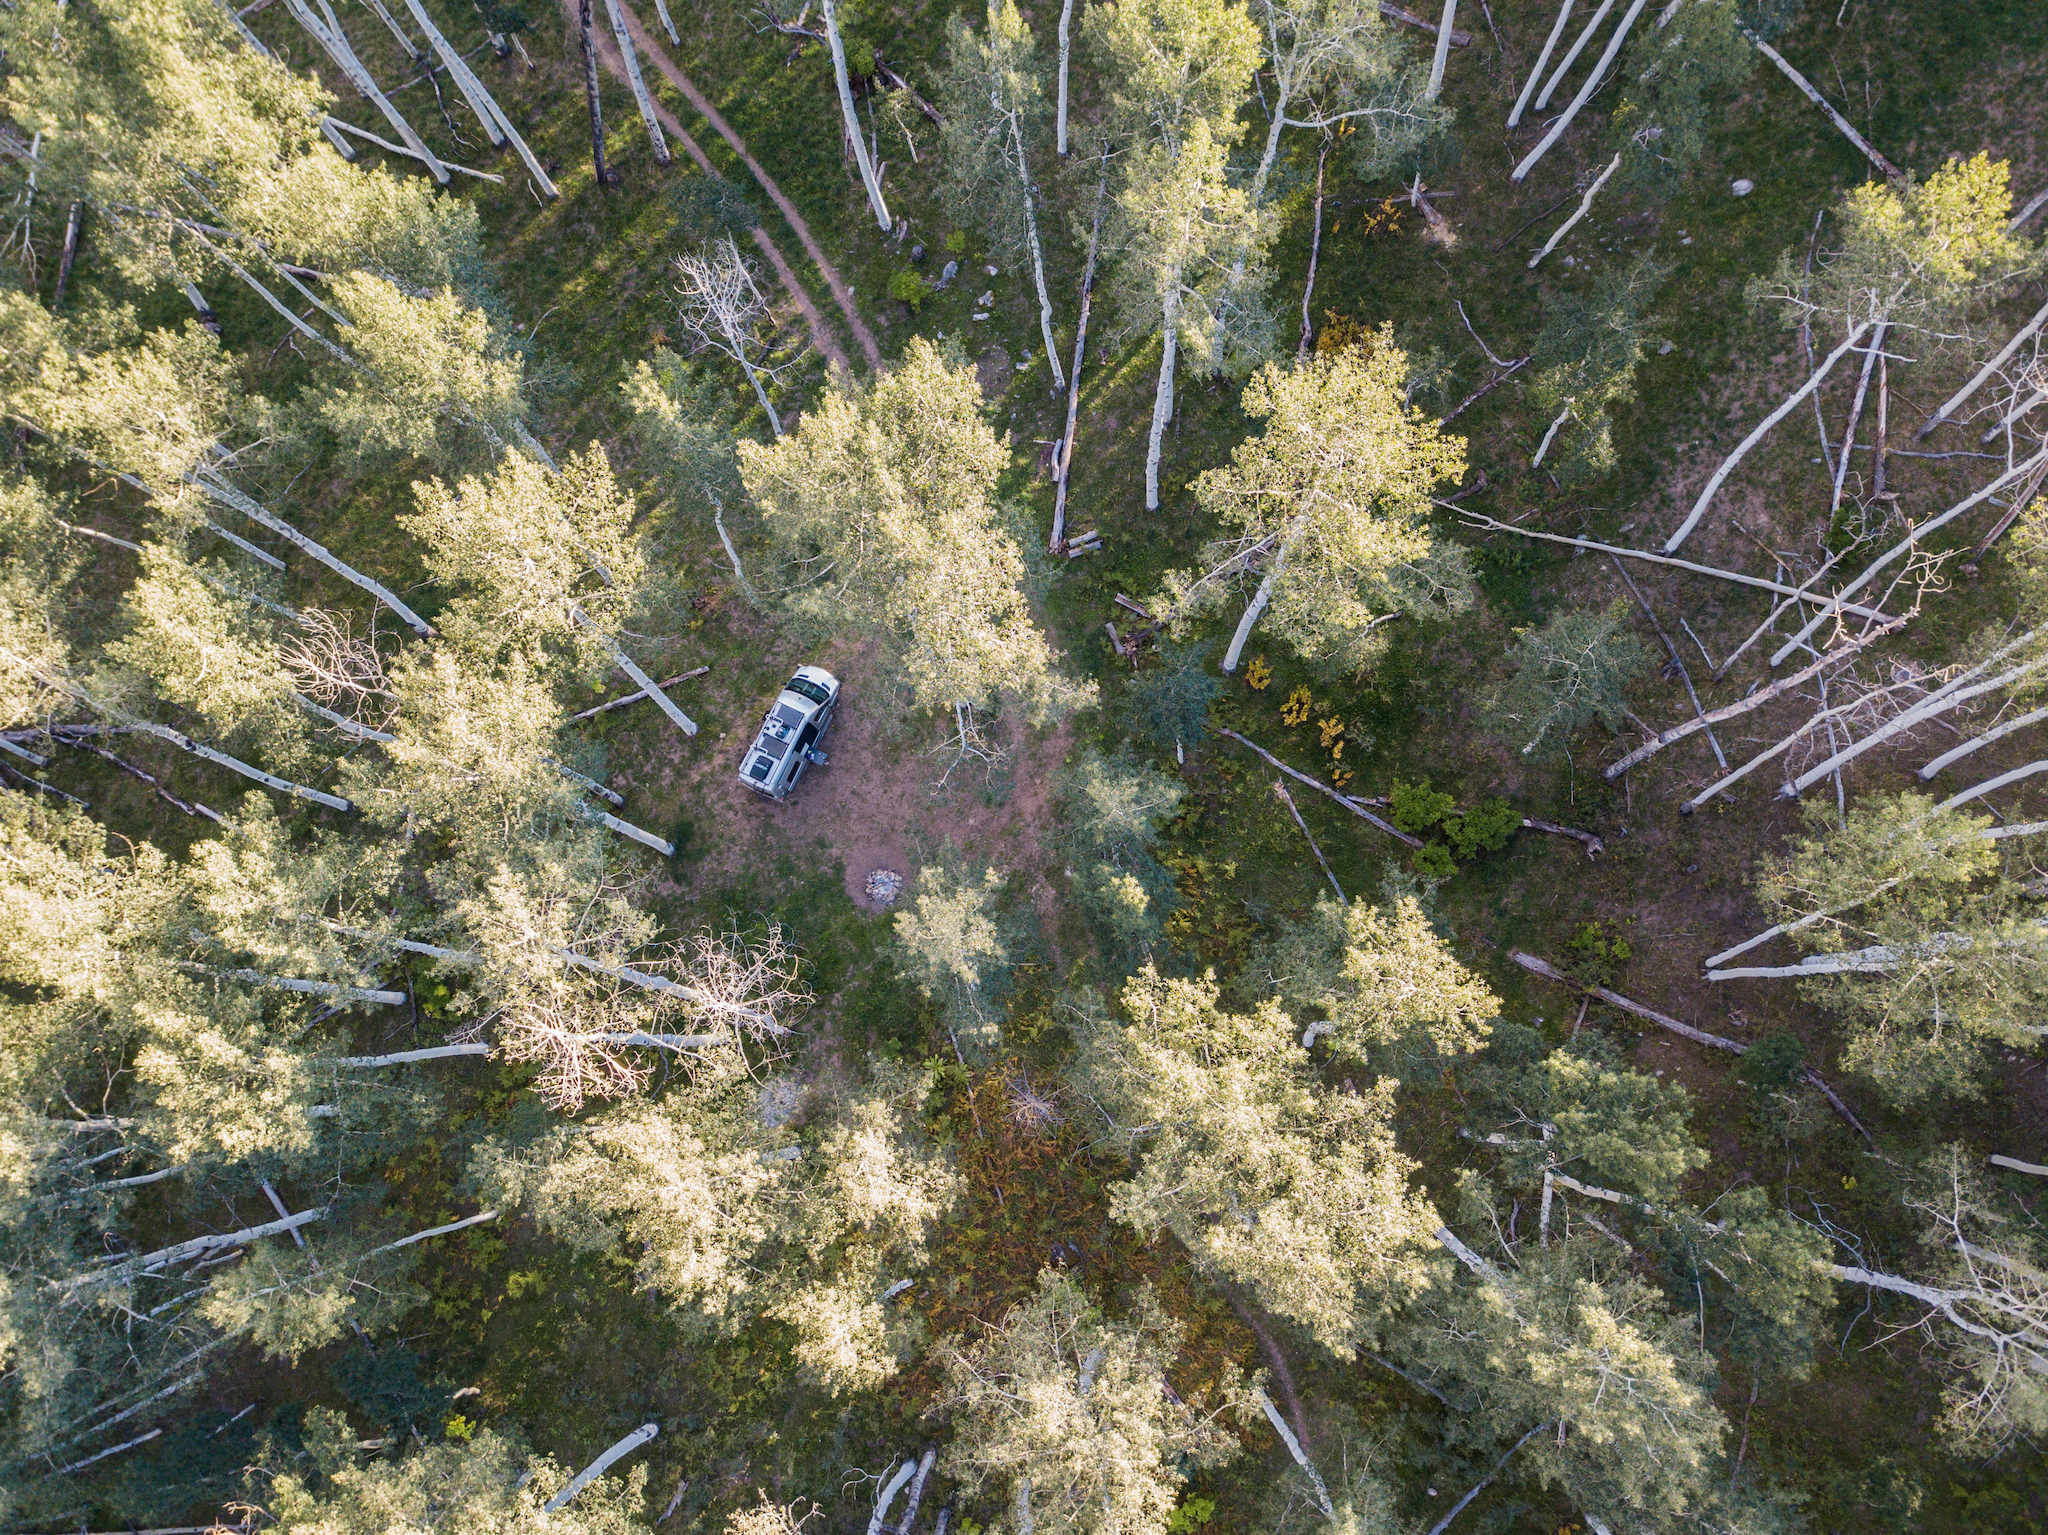 Overhead view of Winnebago Revel parked in the middle of a forest.